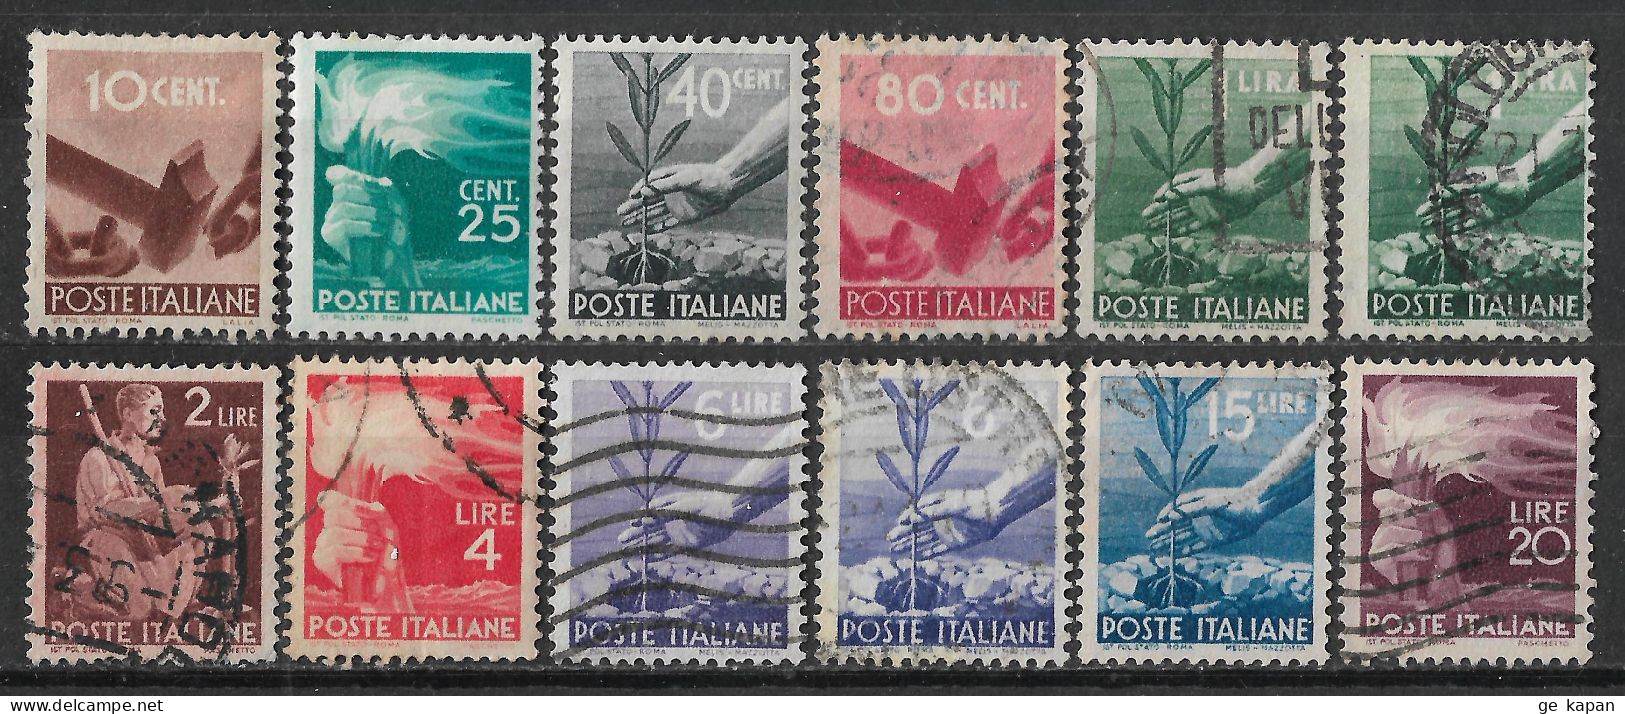 1945-1947 ITALY Set Of 12 USED STAMPS (Scott # 463,464A,465,467,468,470,471A,472A,473A,474) - Used